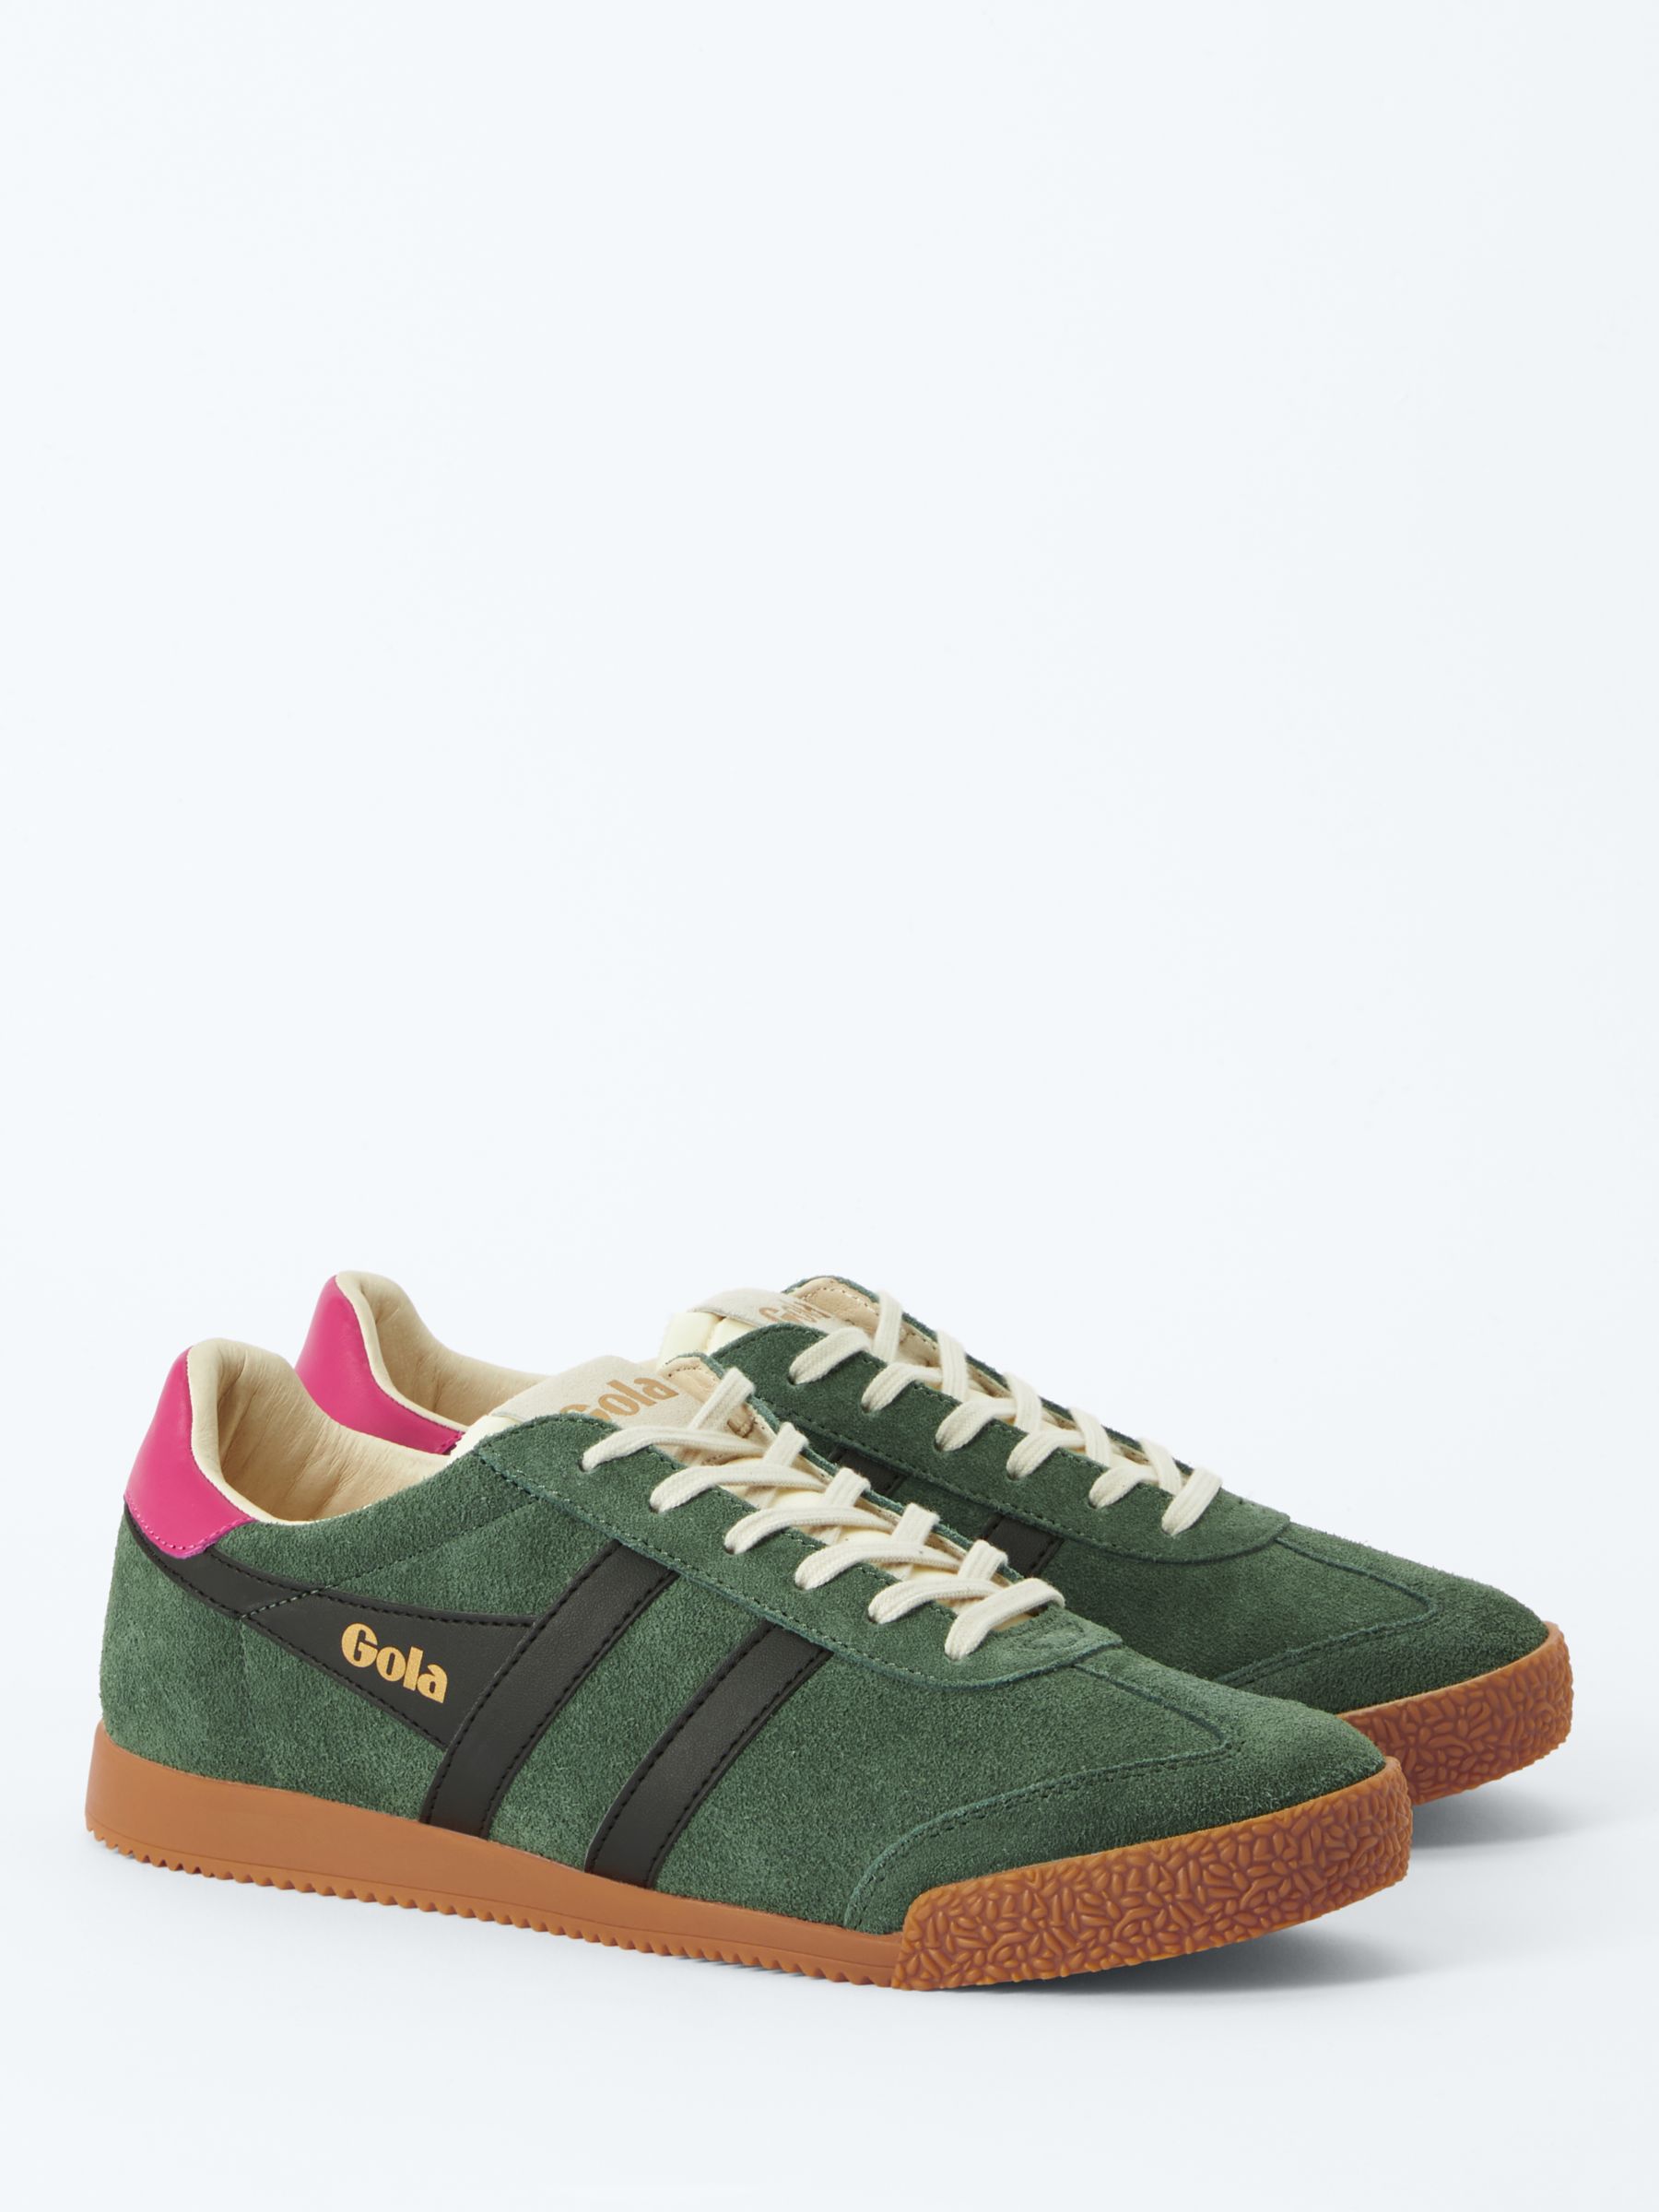 Gola Classics Elan Suede Lace Up Trainers, Green/Fuchsia at John Lewis ...